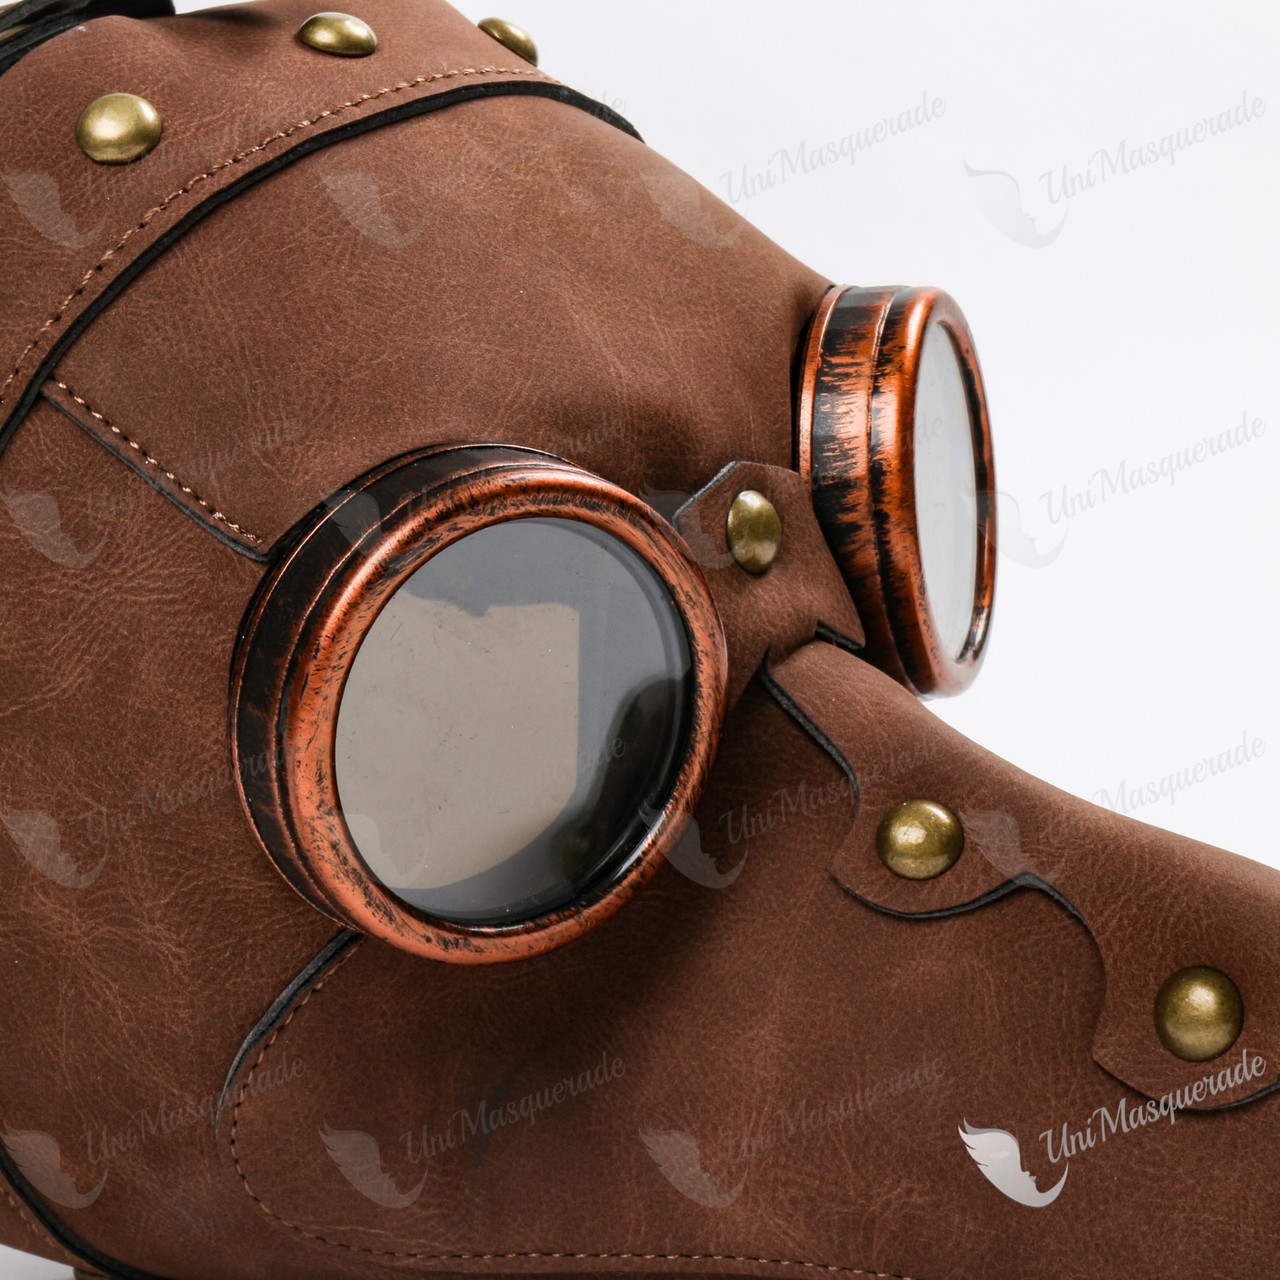 Owl Leather Mask Steampunk Style Masquerade Steampunk Mask Leather